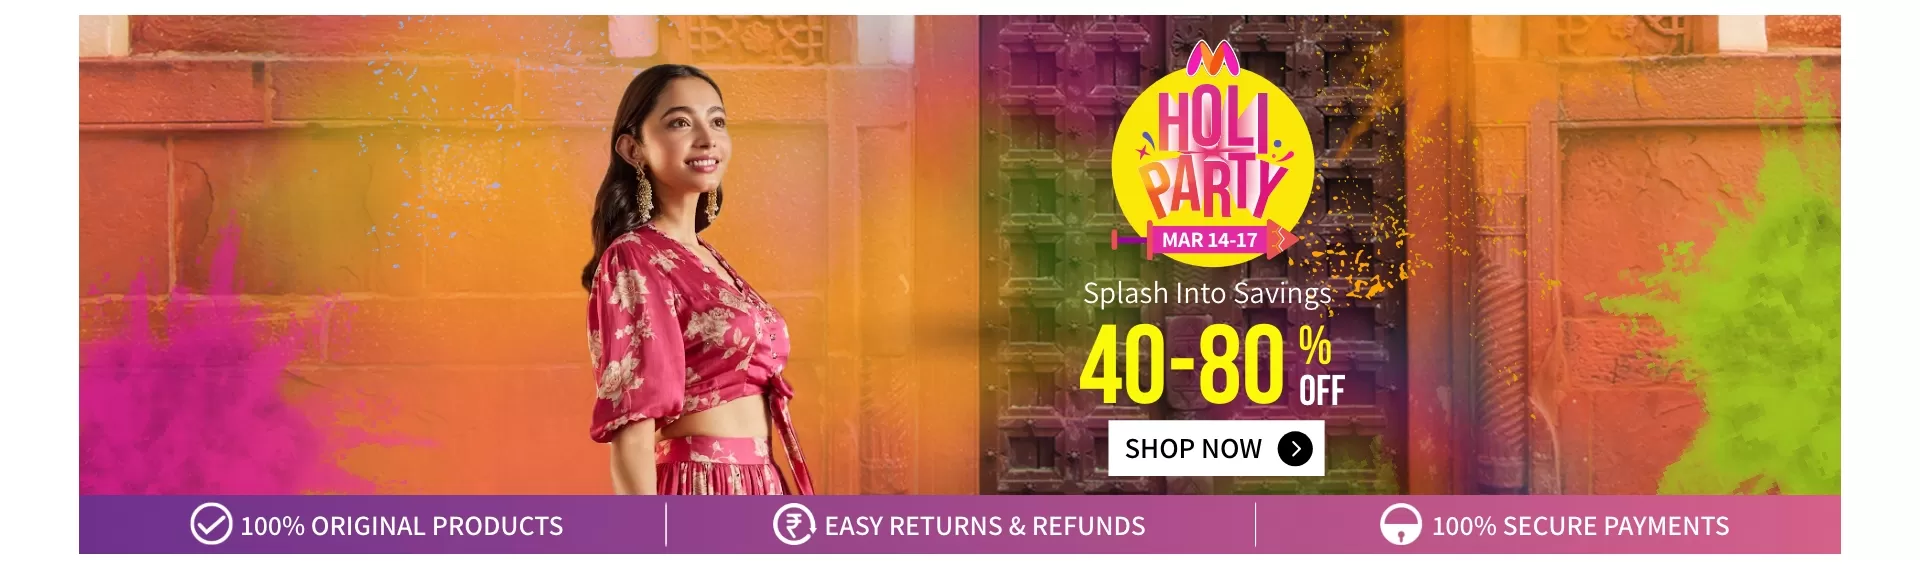 Myntra Holi Party Sale - Get 40-80% Off + 10% Discount on ICICI/HSBC Bank Cards